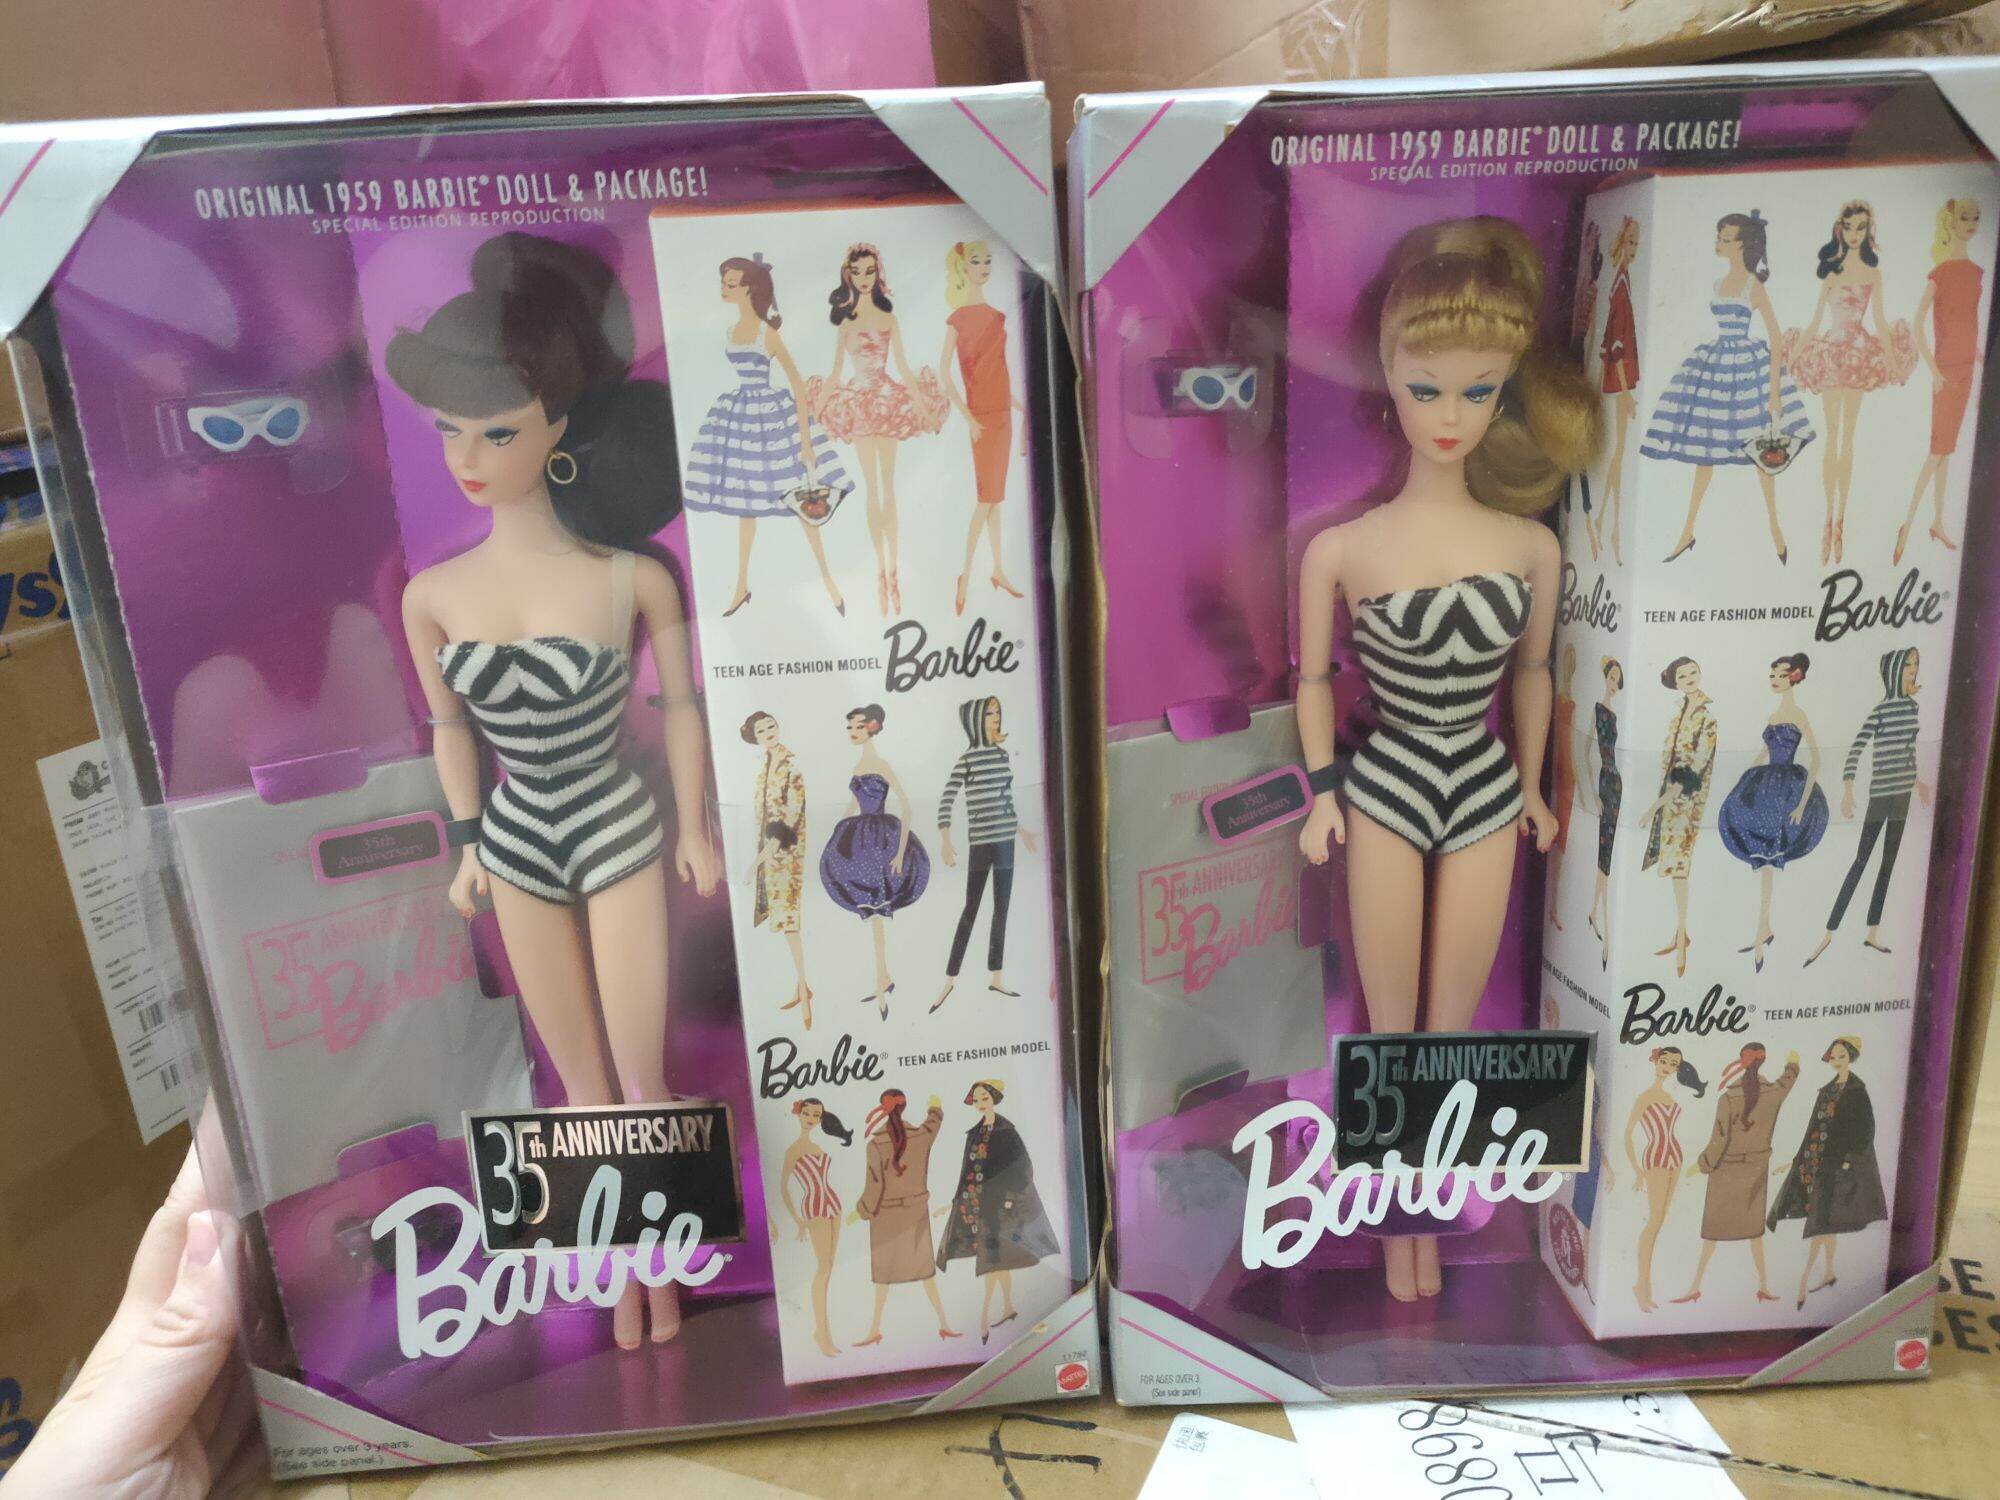 Barbie(バービー) 35th Anniversary Special Edition Reproduction of